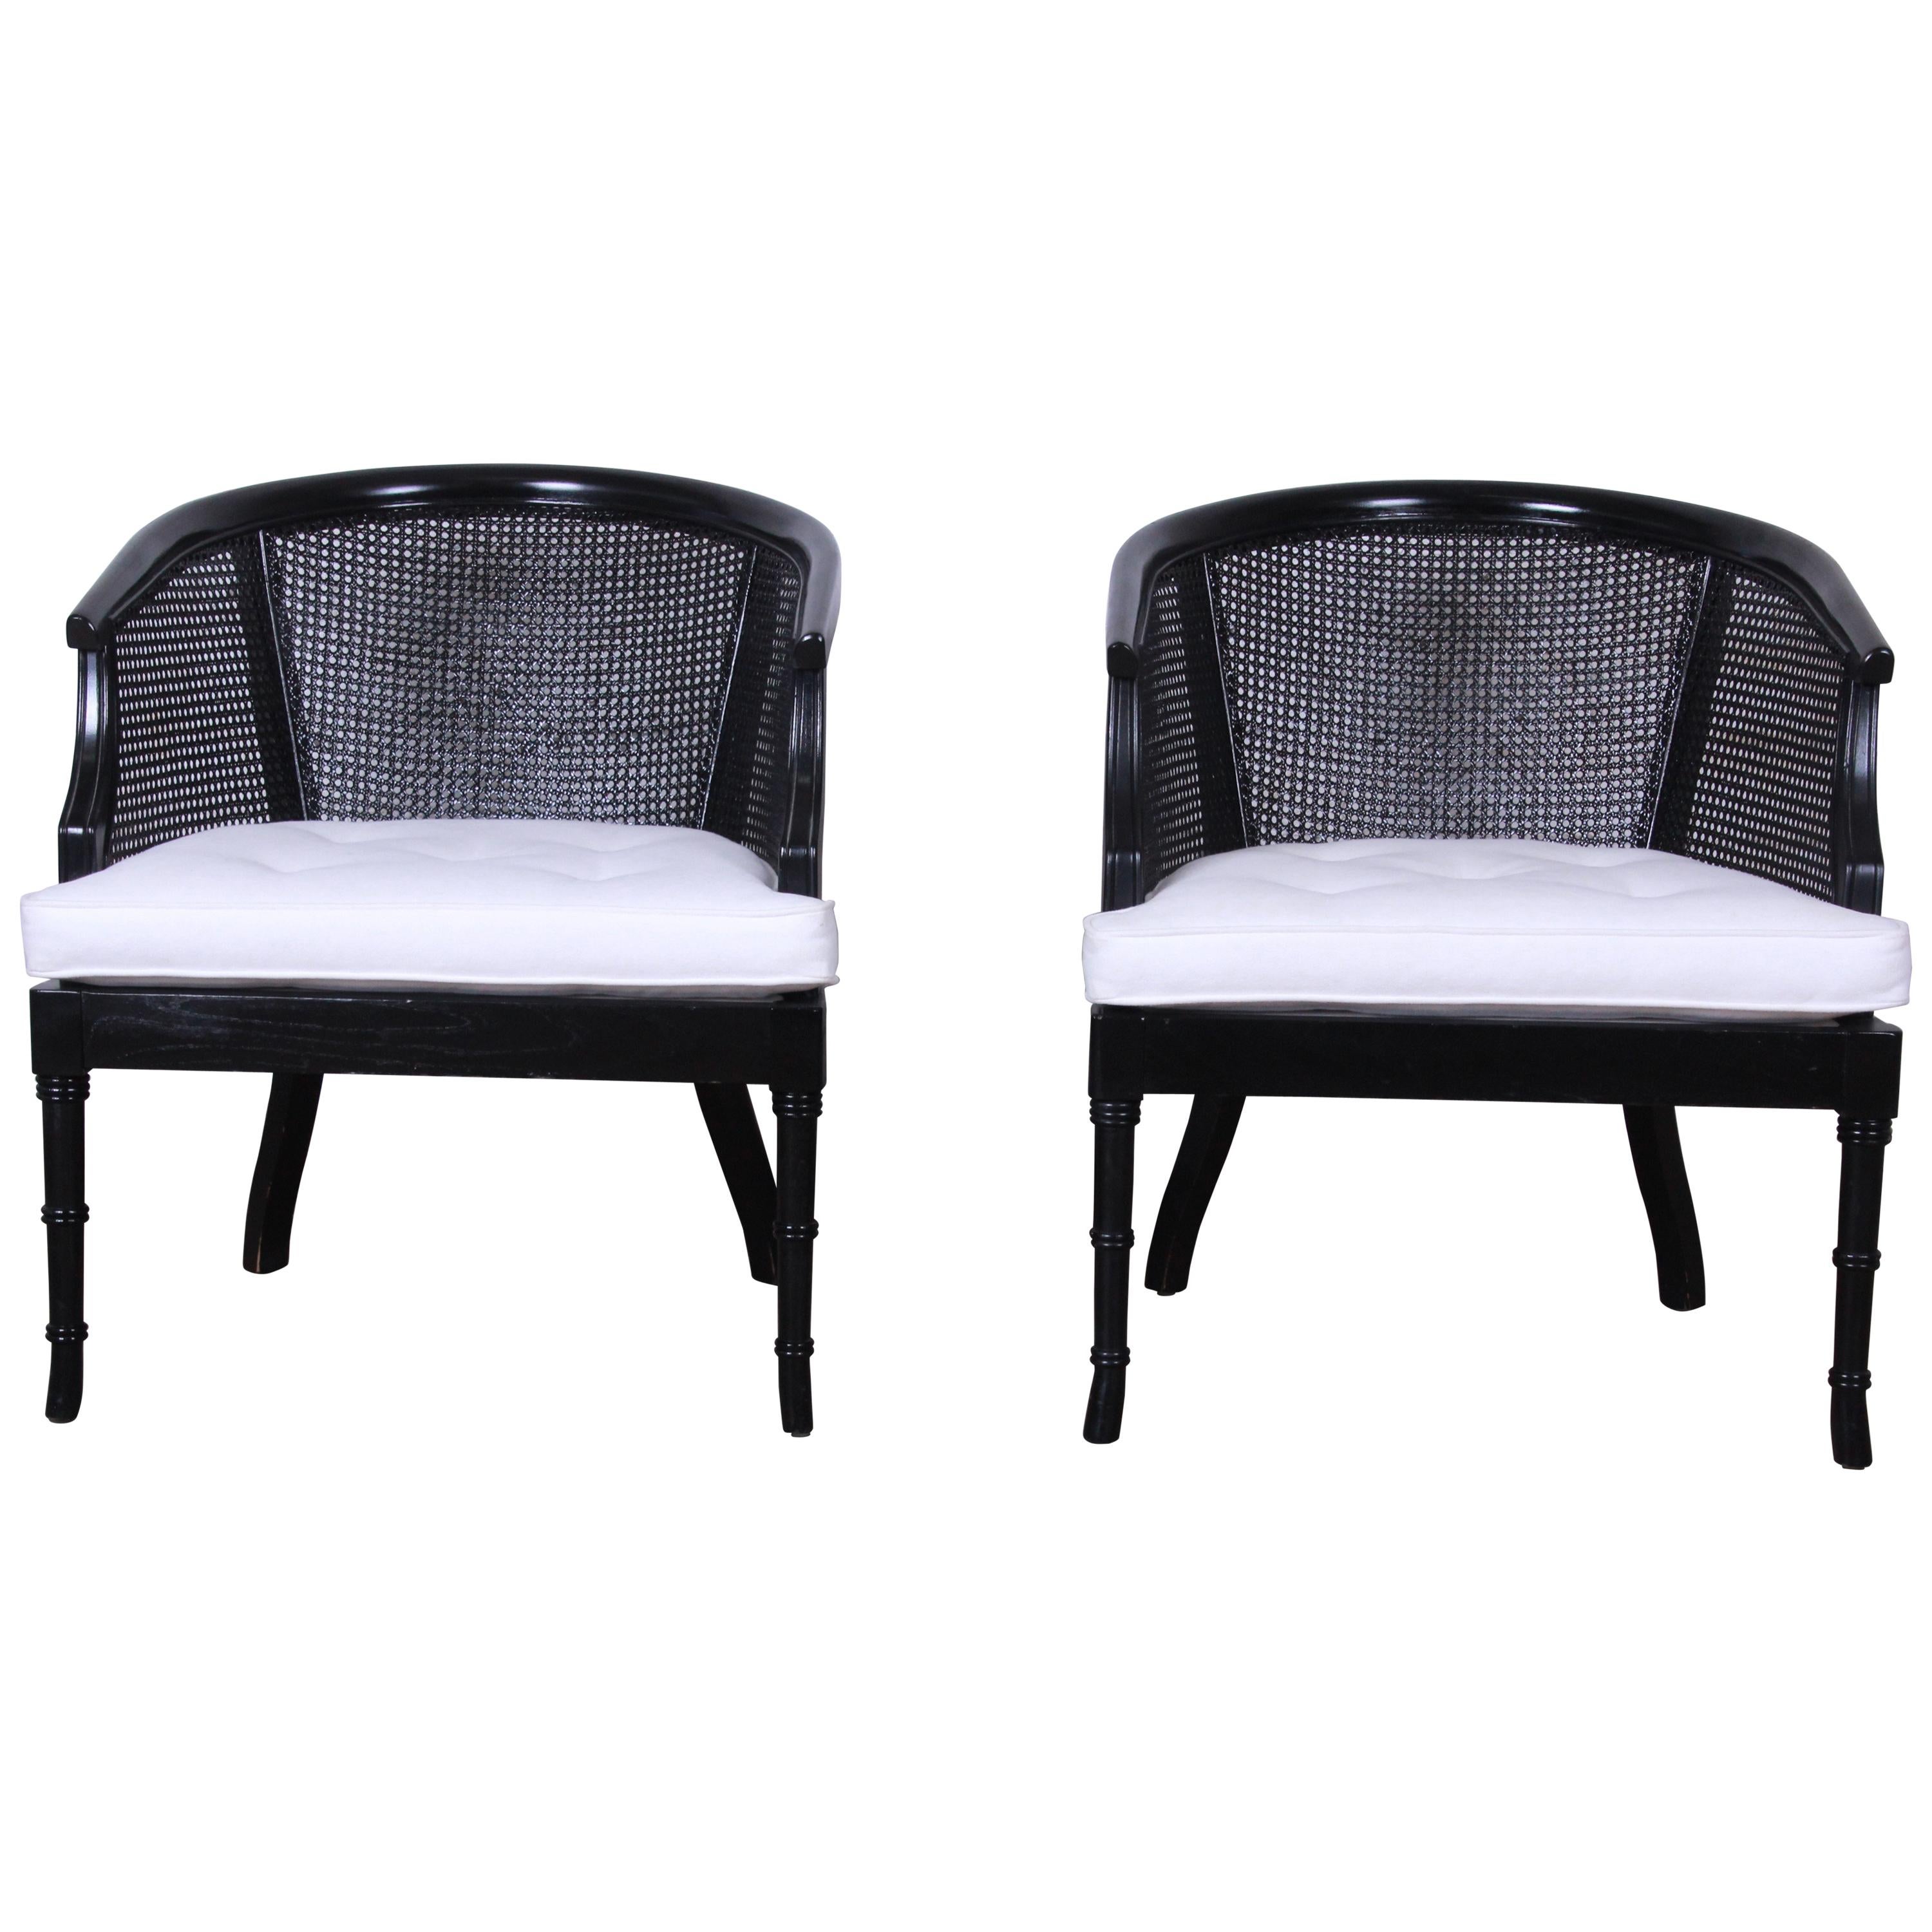 Pair of Hollywood Regency Ebonized Faux Bamboo and Cane Barrel Back Club Chairs